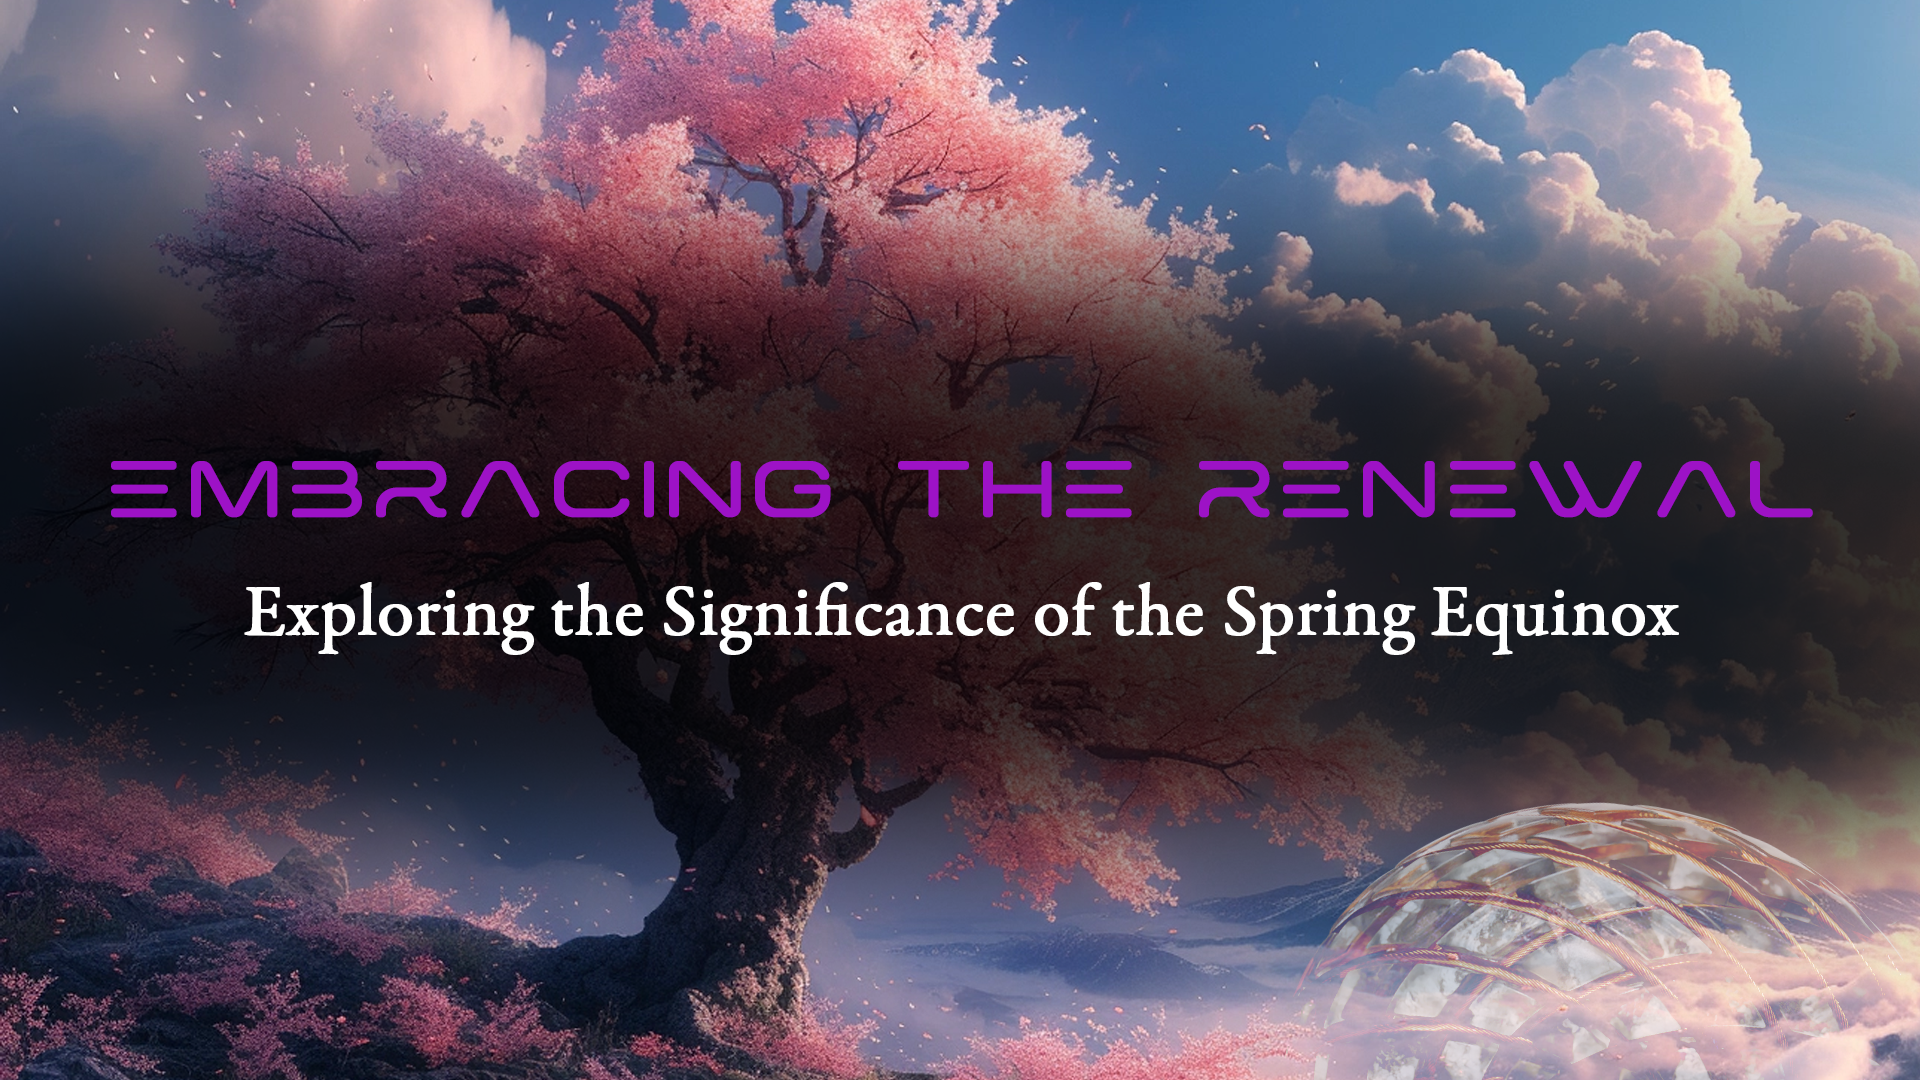 Embracing the Renewal: Exploring the Significance of the Spring Equinox